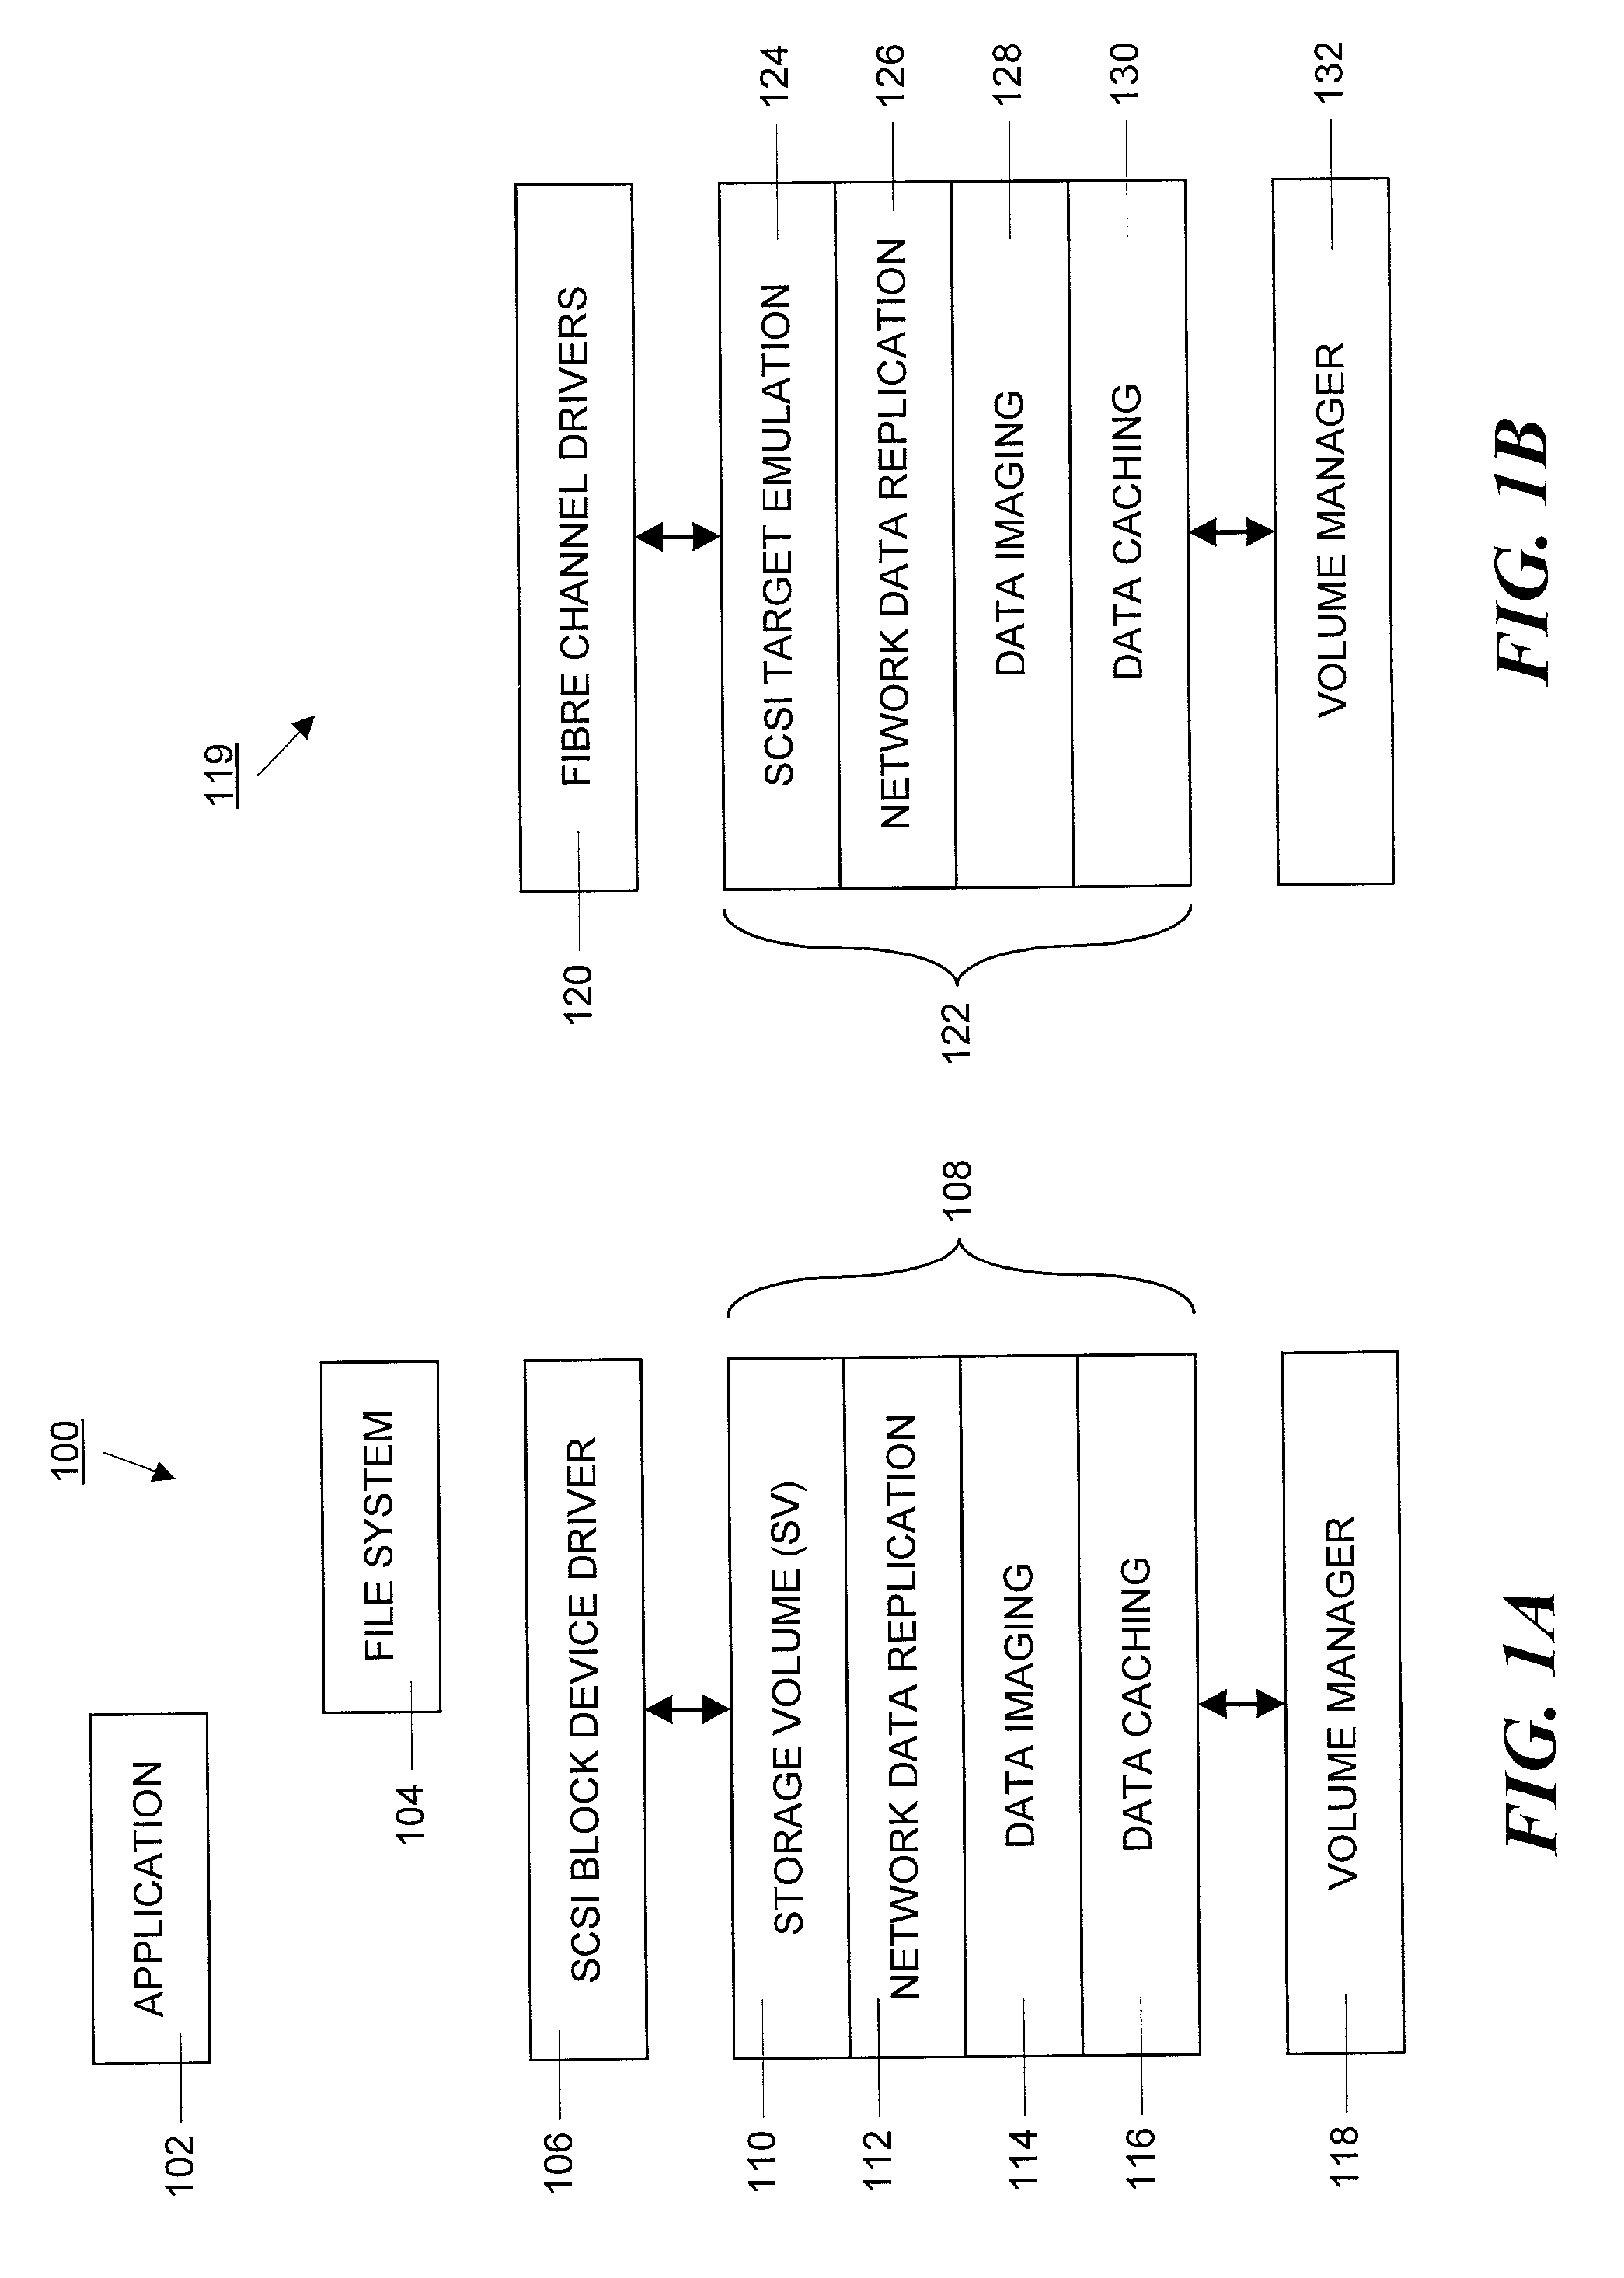 Method and apparatus for managing data caching in a distributed computer system